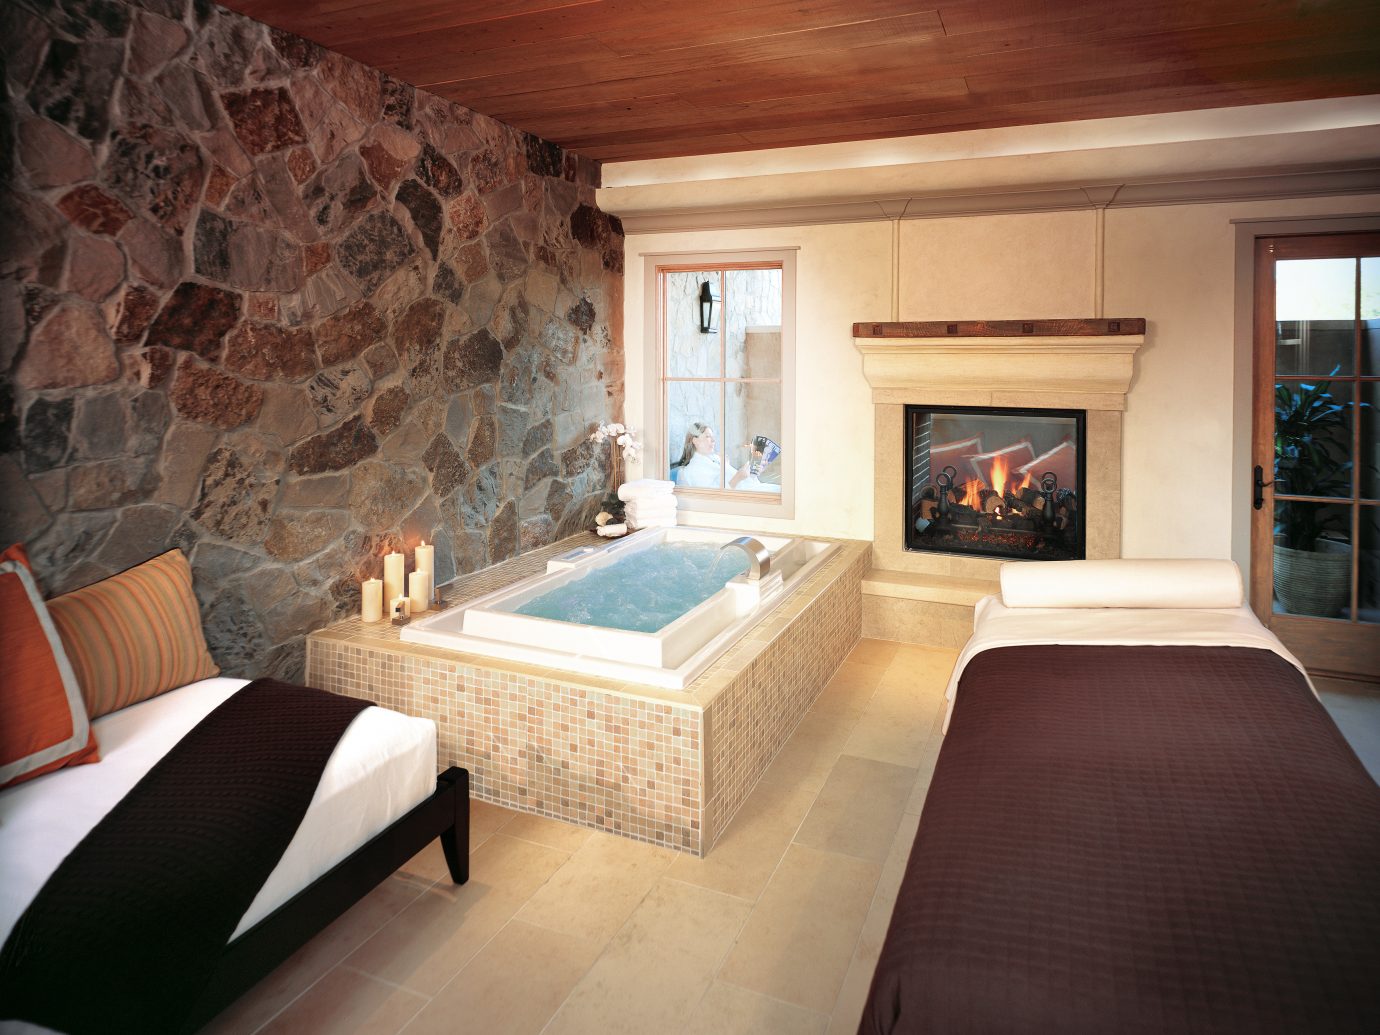 Bath Hotels Luxury Romance Spa Spa Retreats Trip Ideas indoor sofa room wall floor Living ceiling property house Fireplace estate living room home hardwood interior design furniture cottage wood Suite Design real estate stone wood flooring mansion decorated